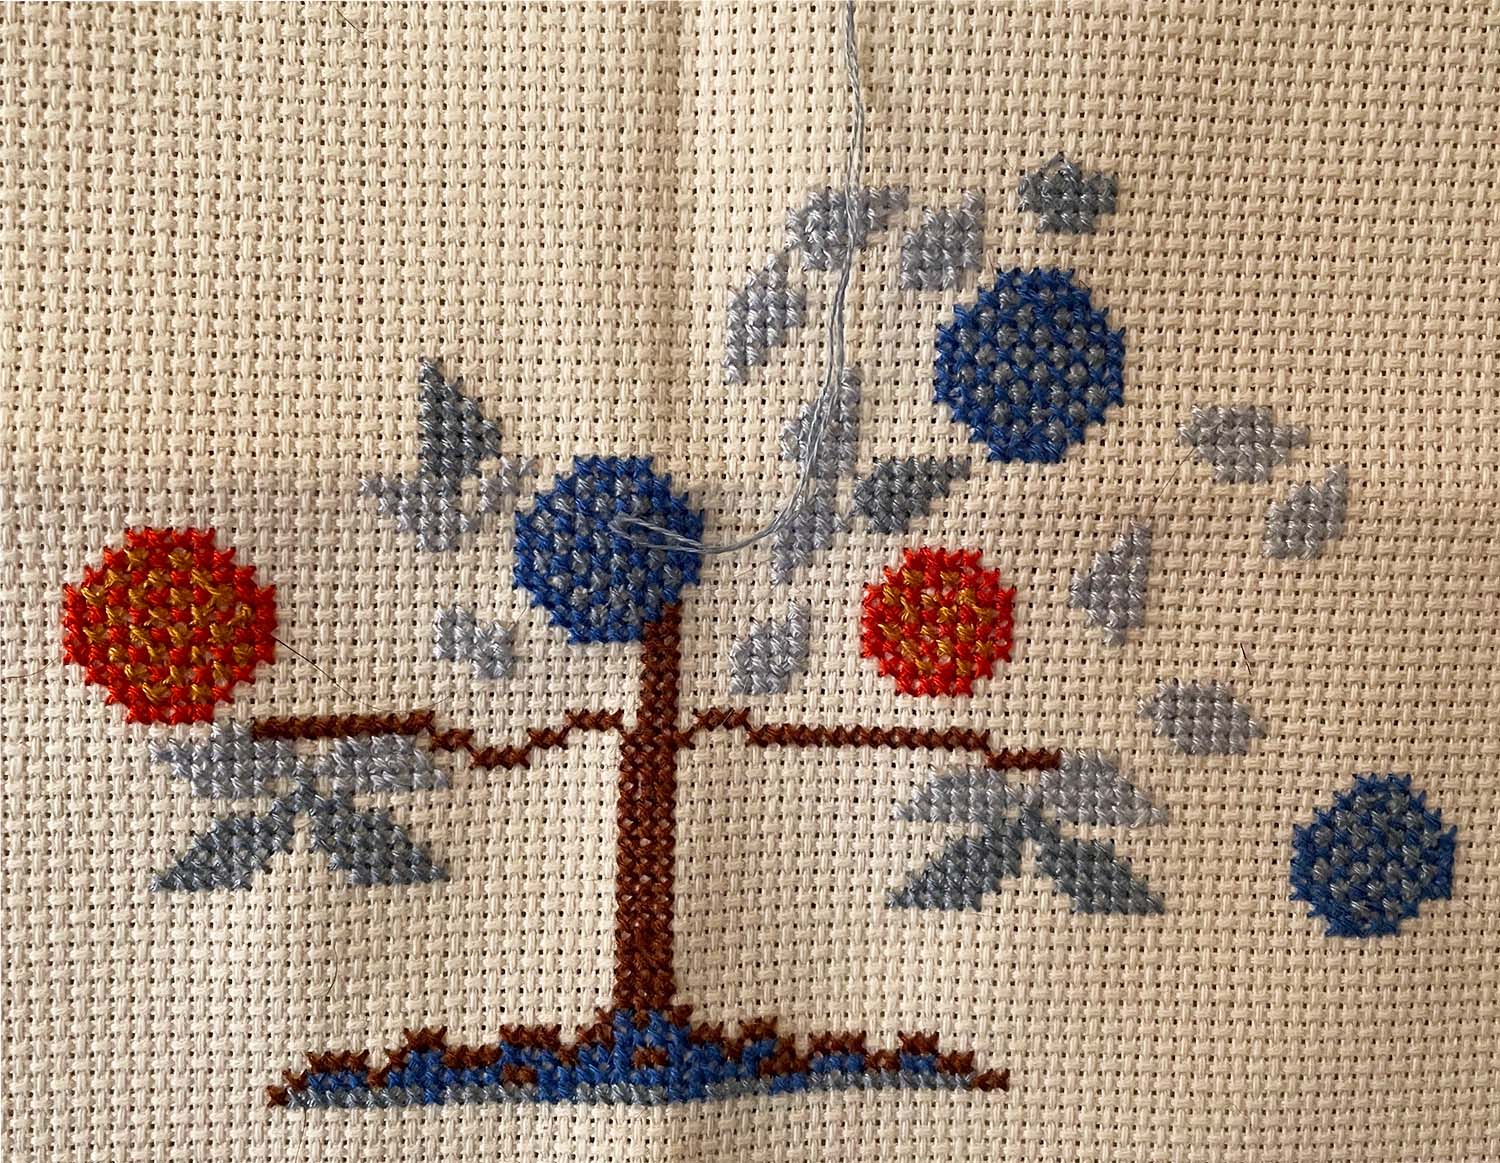 Close-up of an in-progress cross stitch work: a tree of life, with the leaves in blues and orange. A need with blue thread is inserted into the middle of the fabric.